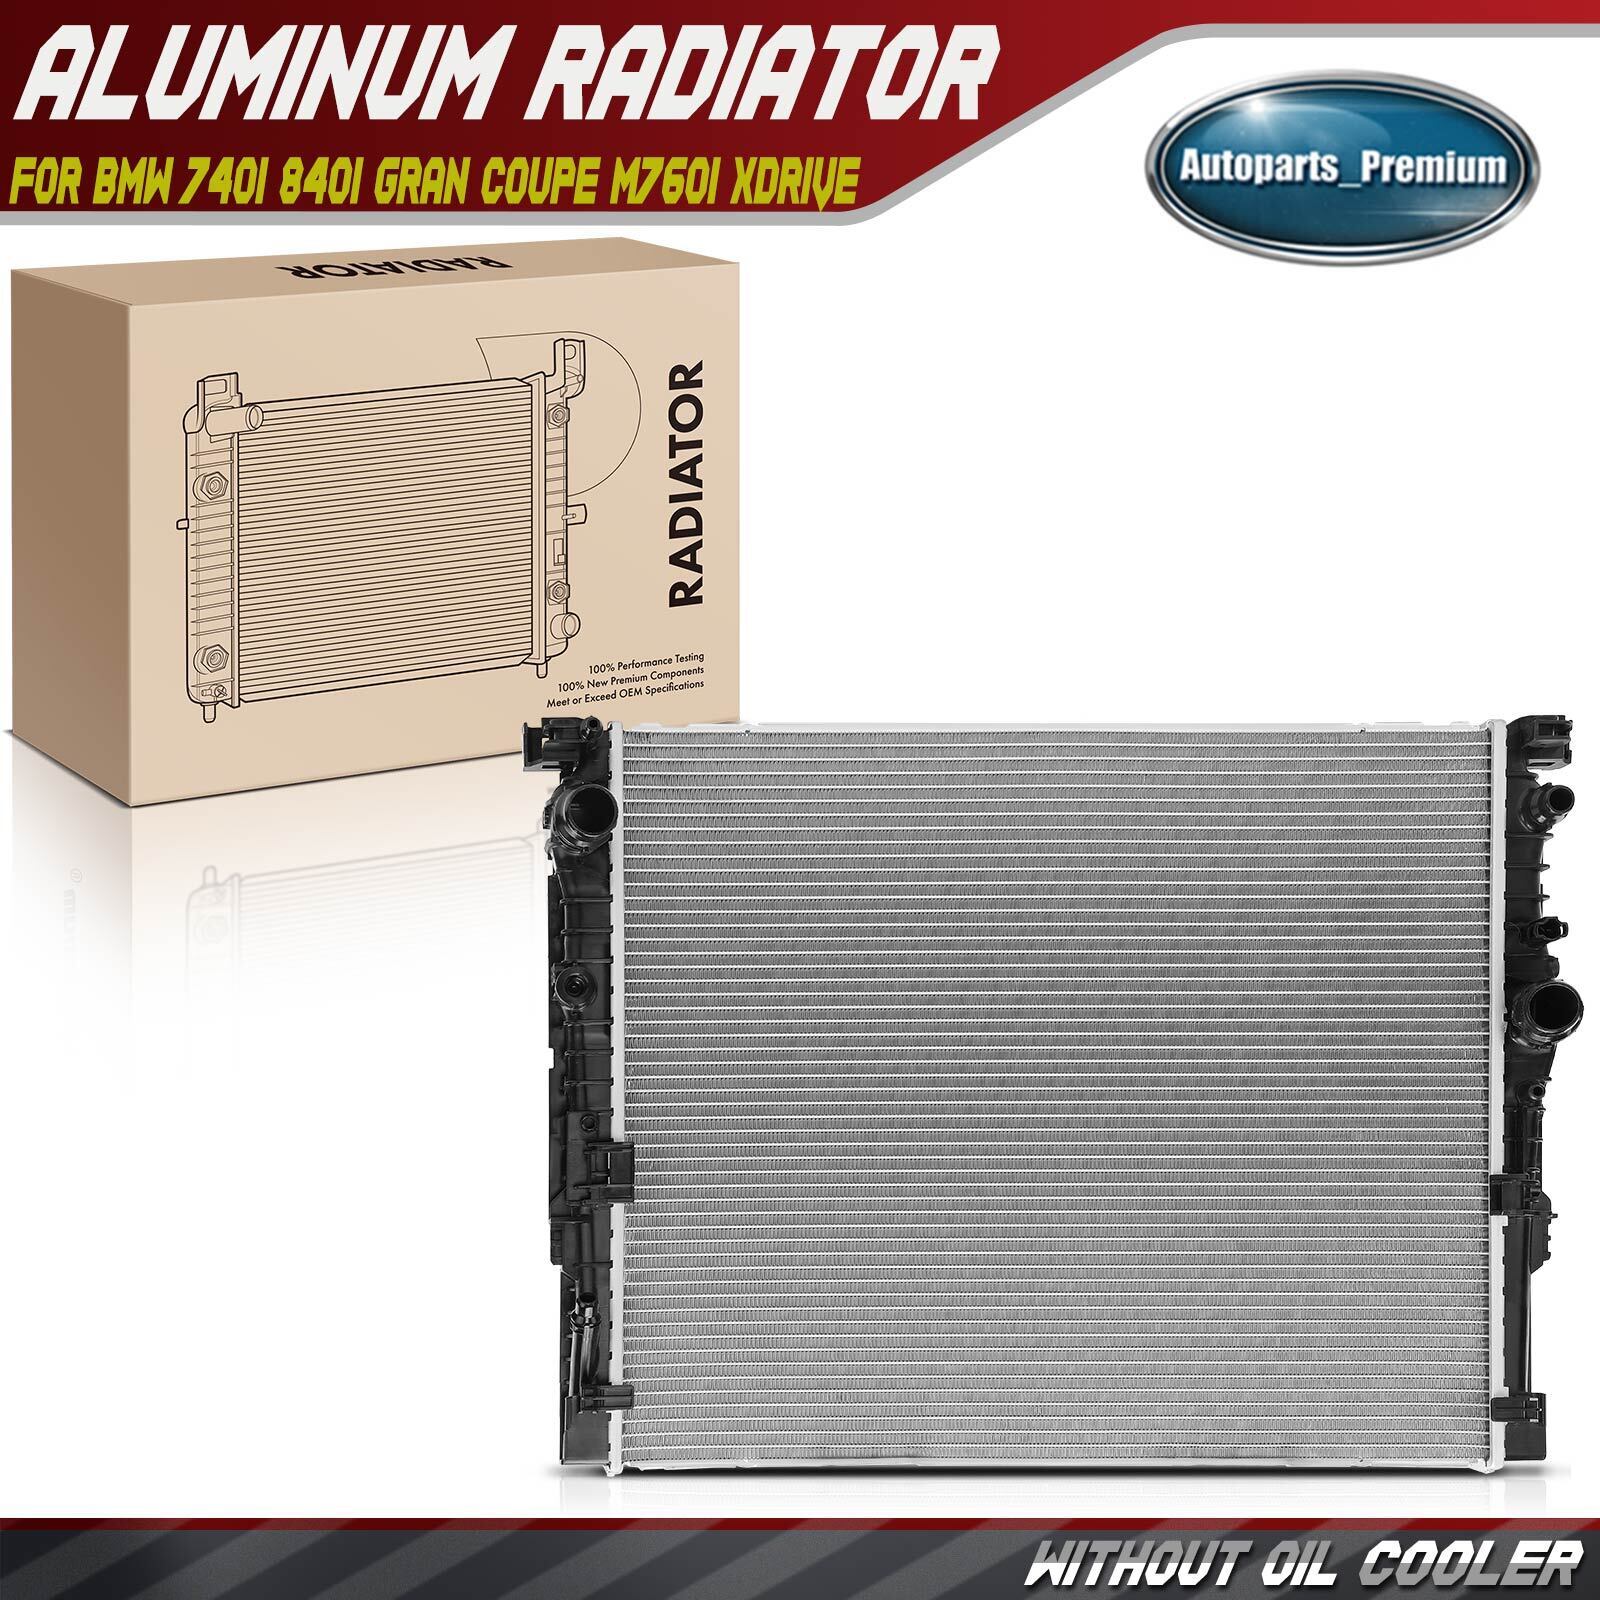 Radiator without Oil Cooler for BMW 740i 840i Gran Coupe M760i xDrive 2020-2022